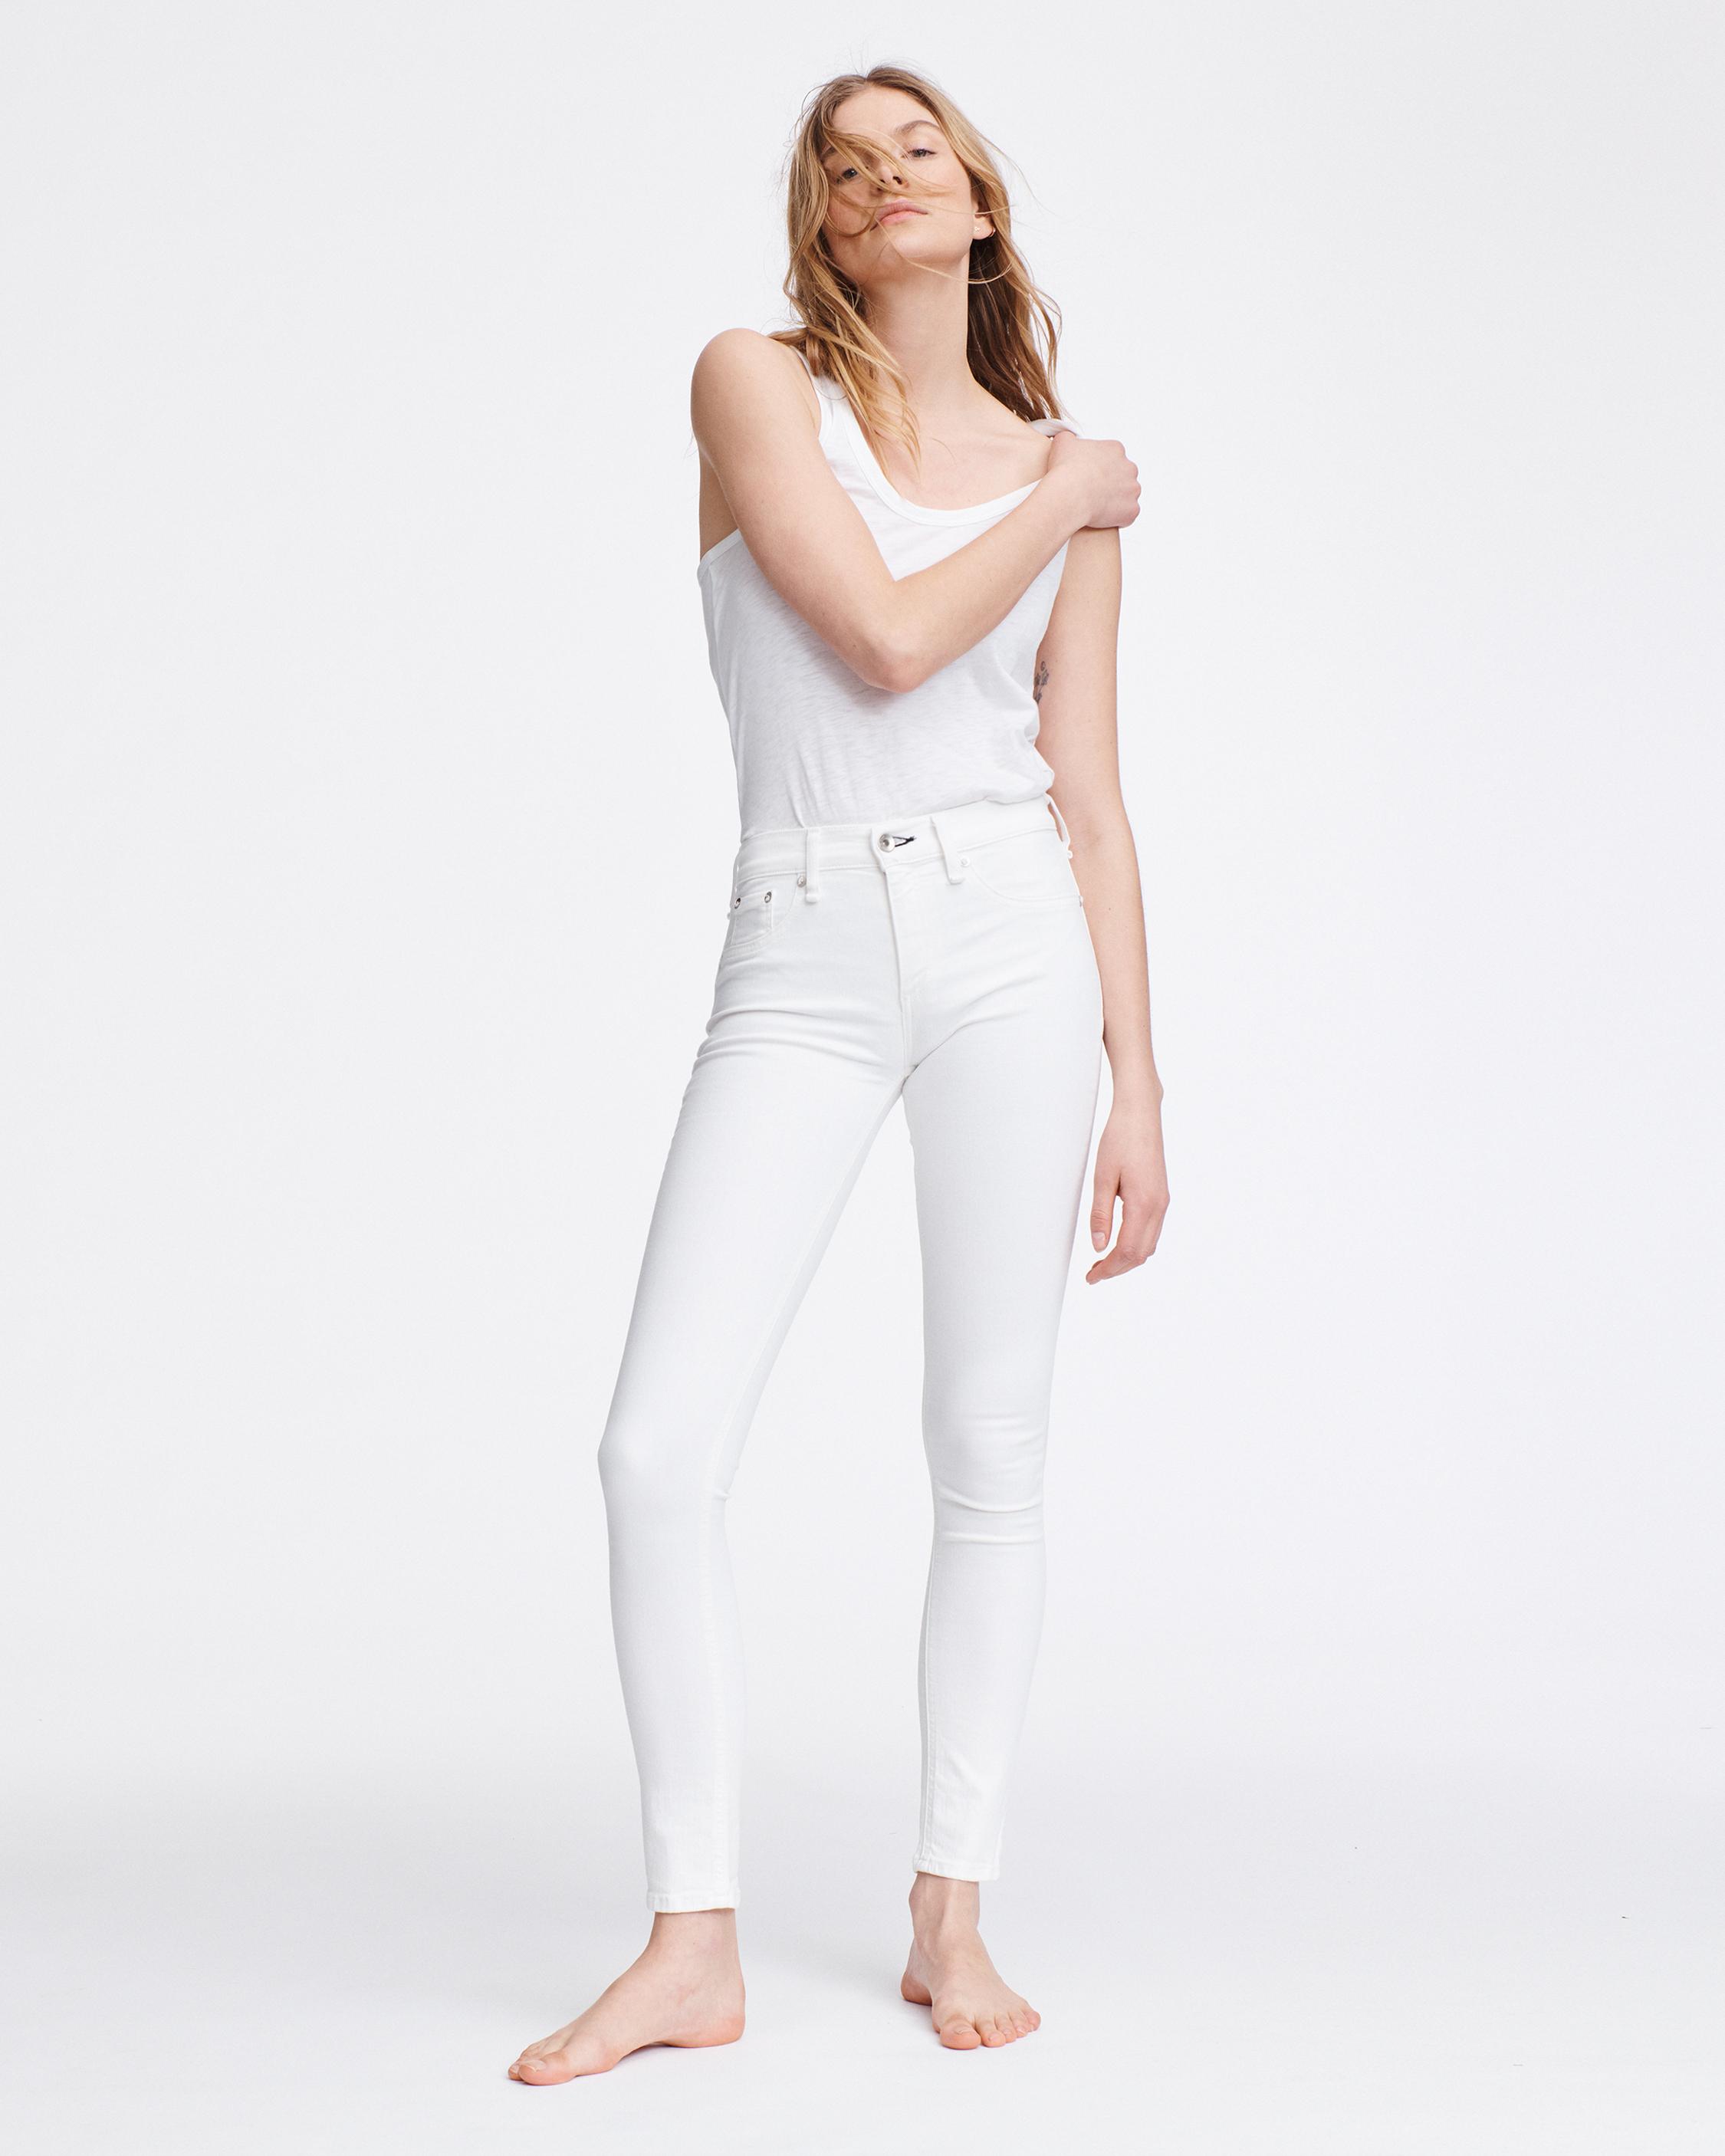 white mid rise skinny jeans